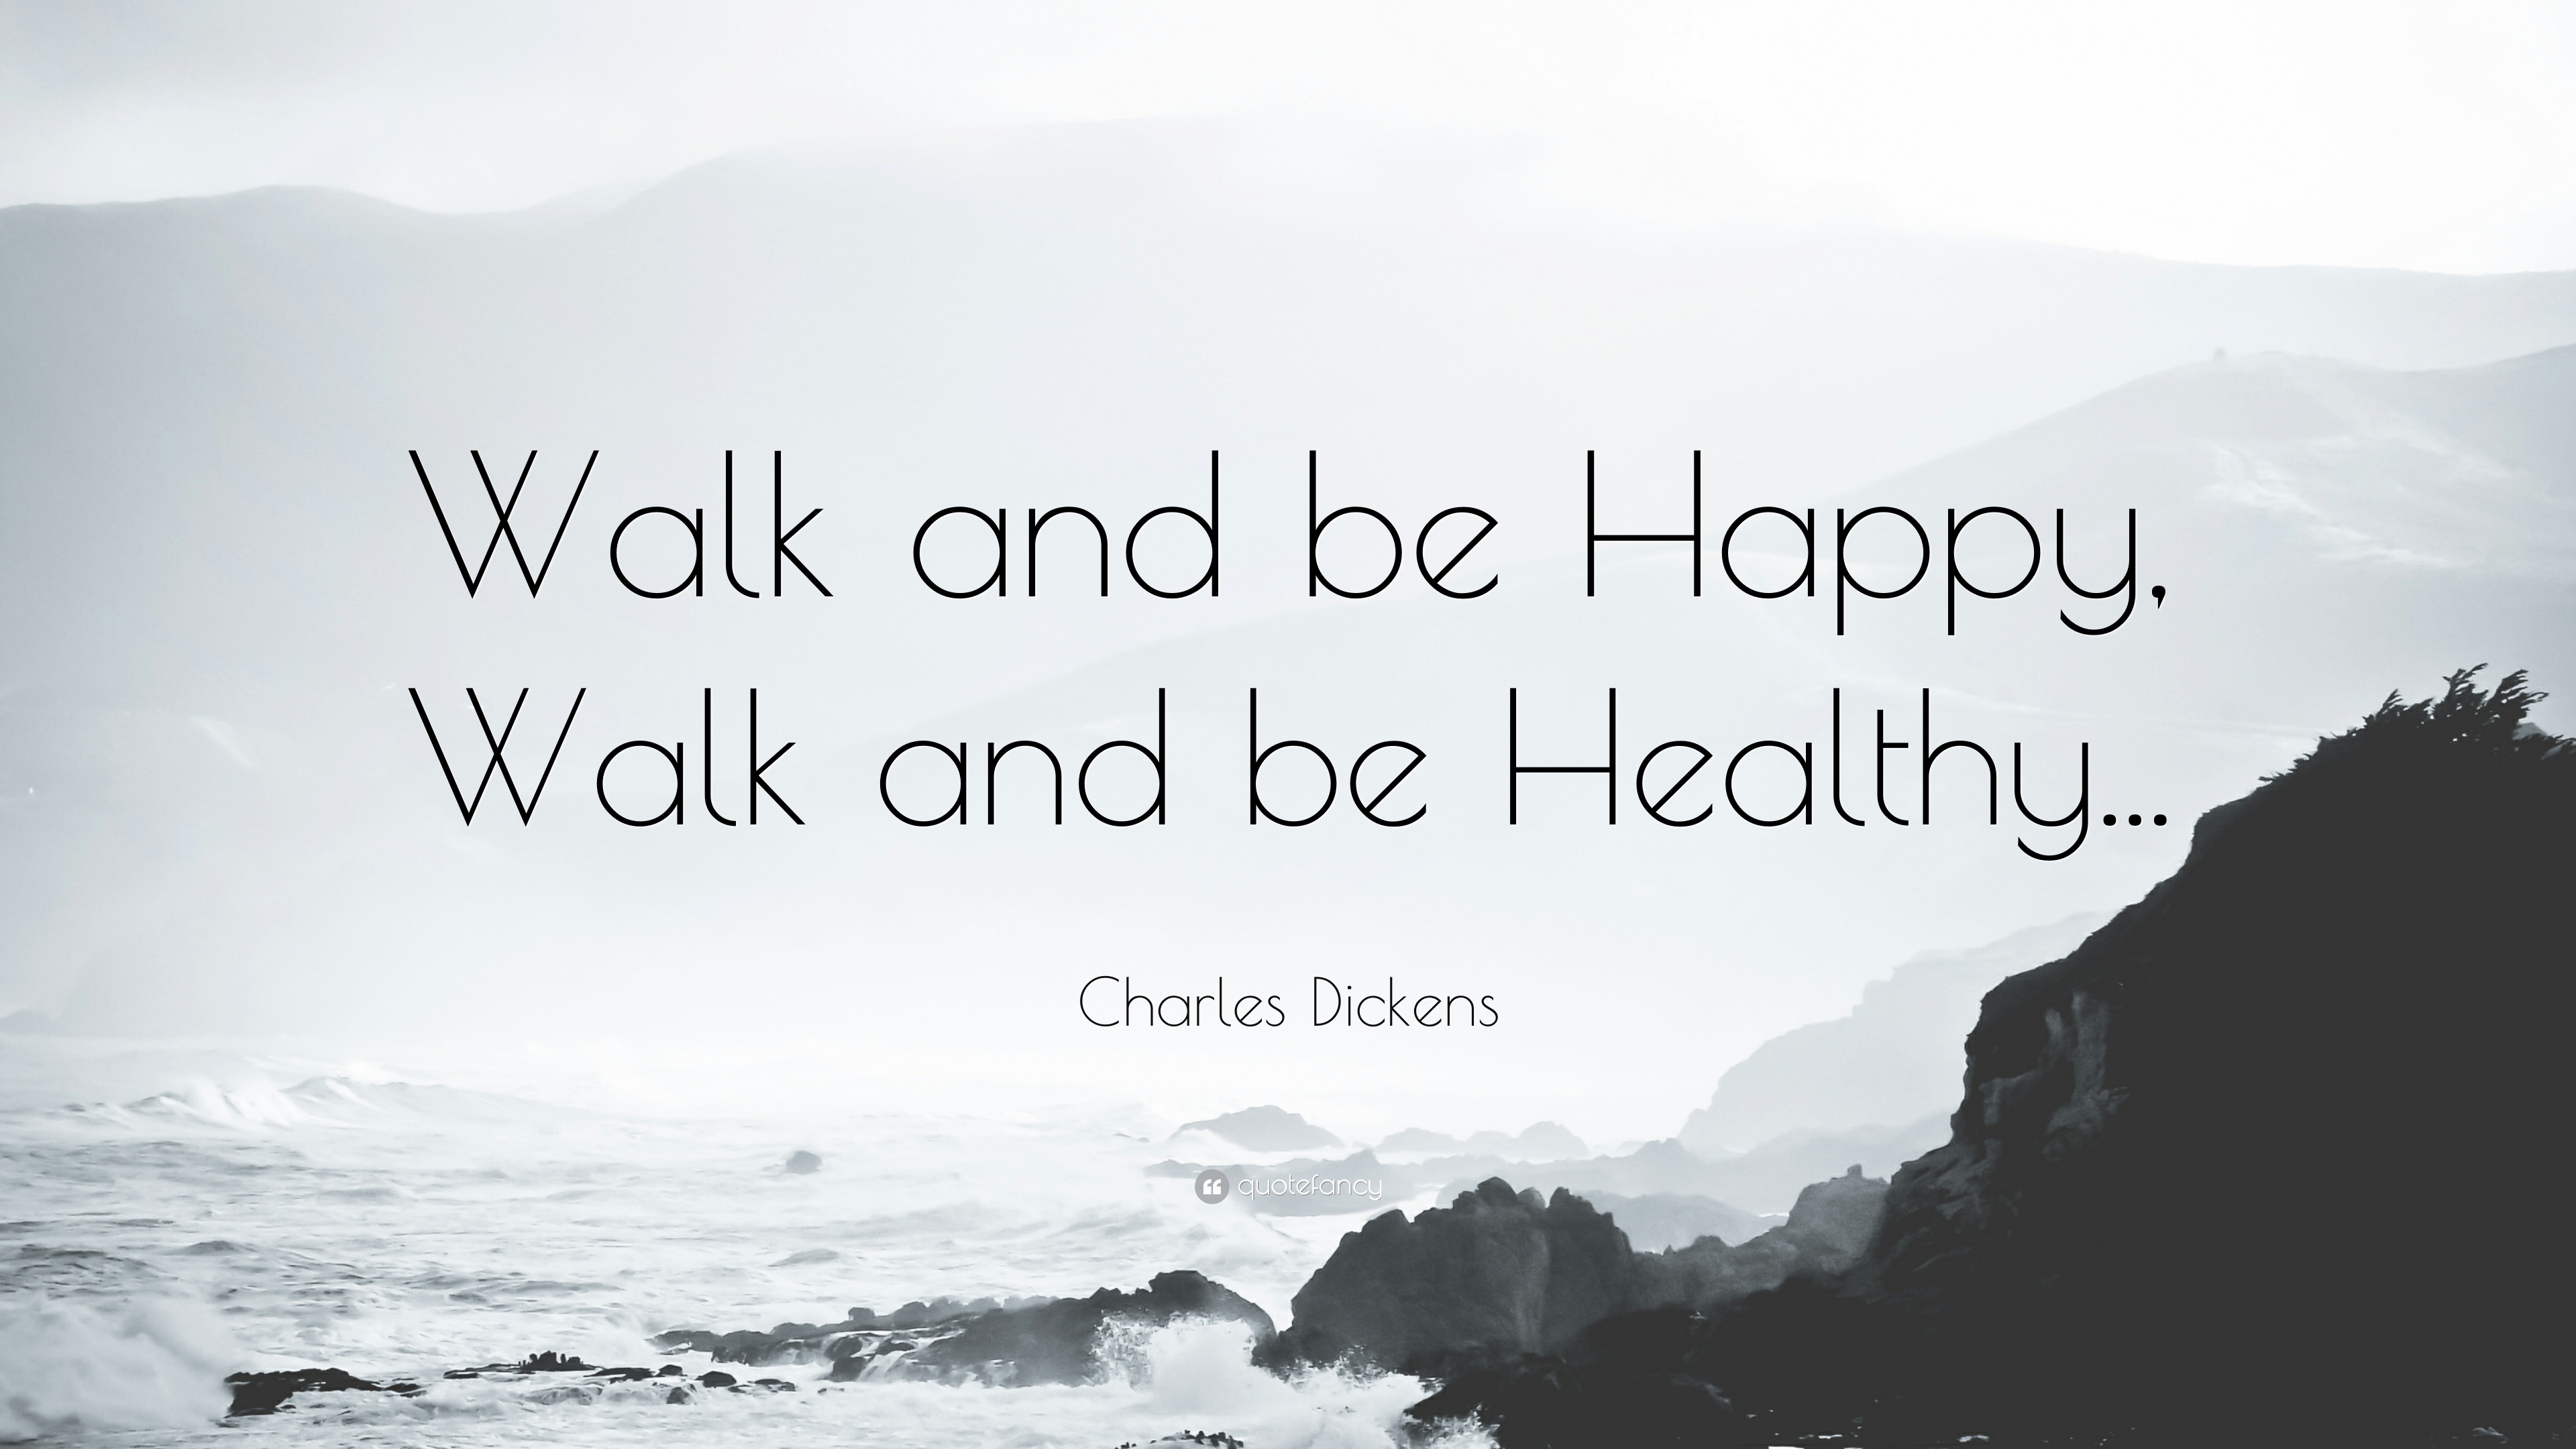 Charles Dickens Quote: “Walk and be Happy, Walk and be Healthy